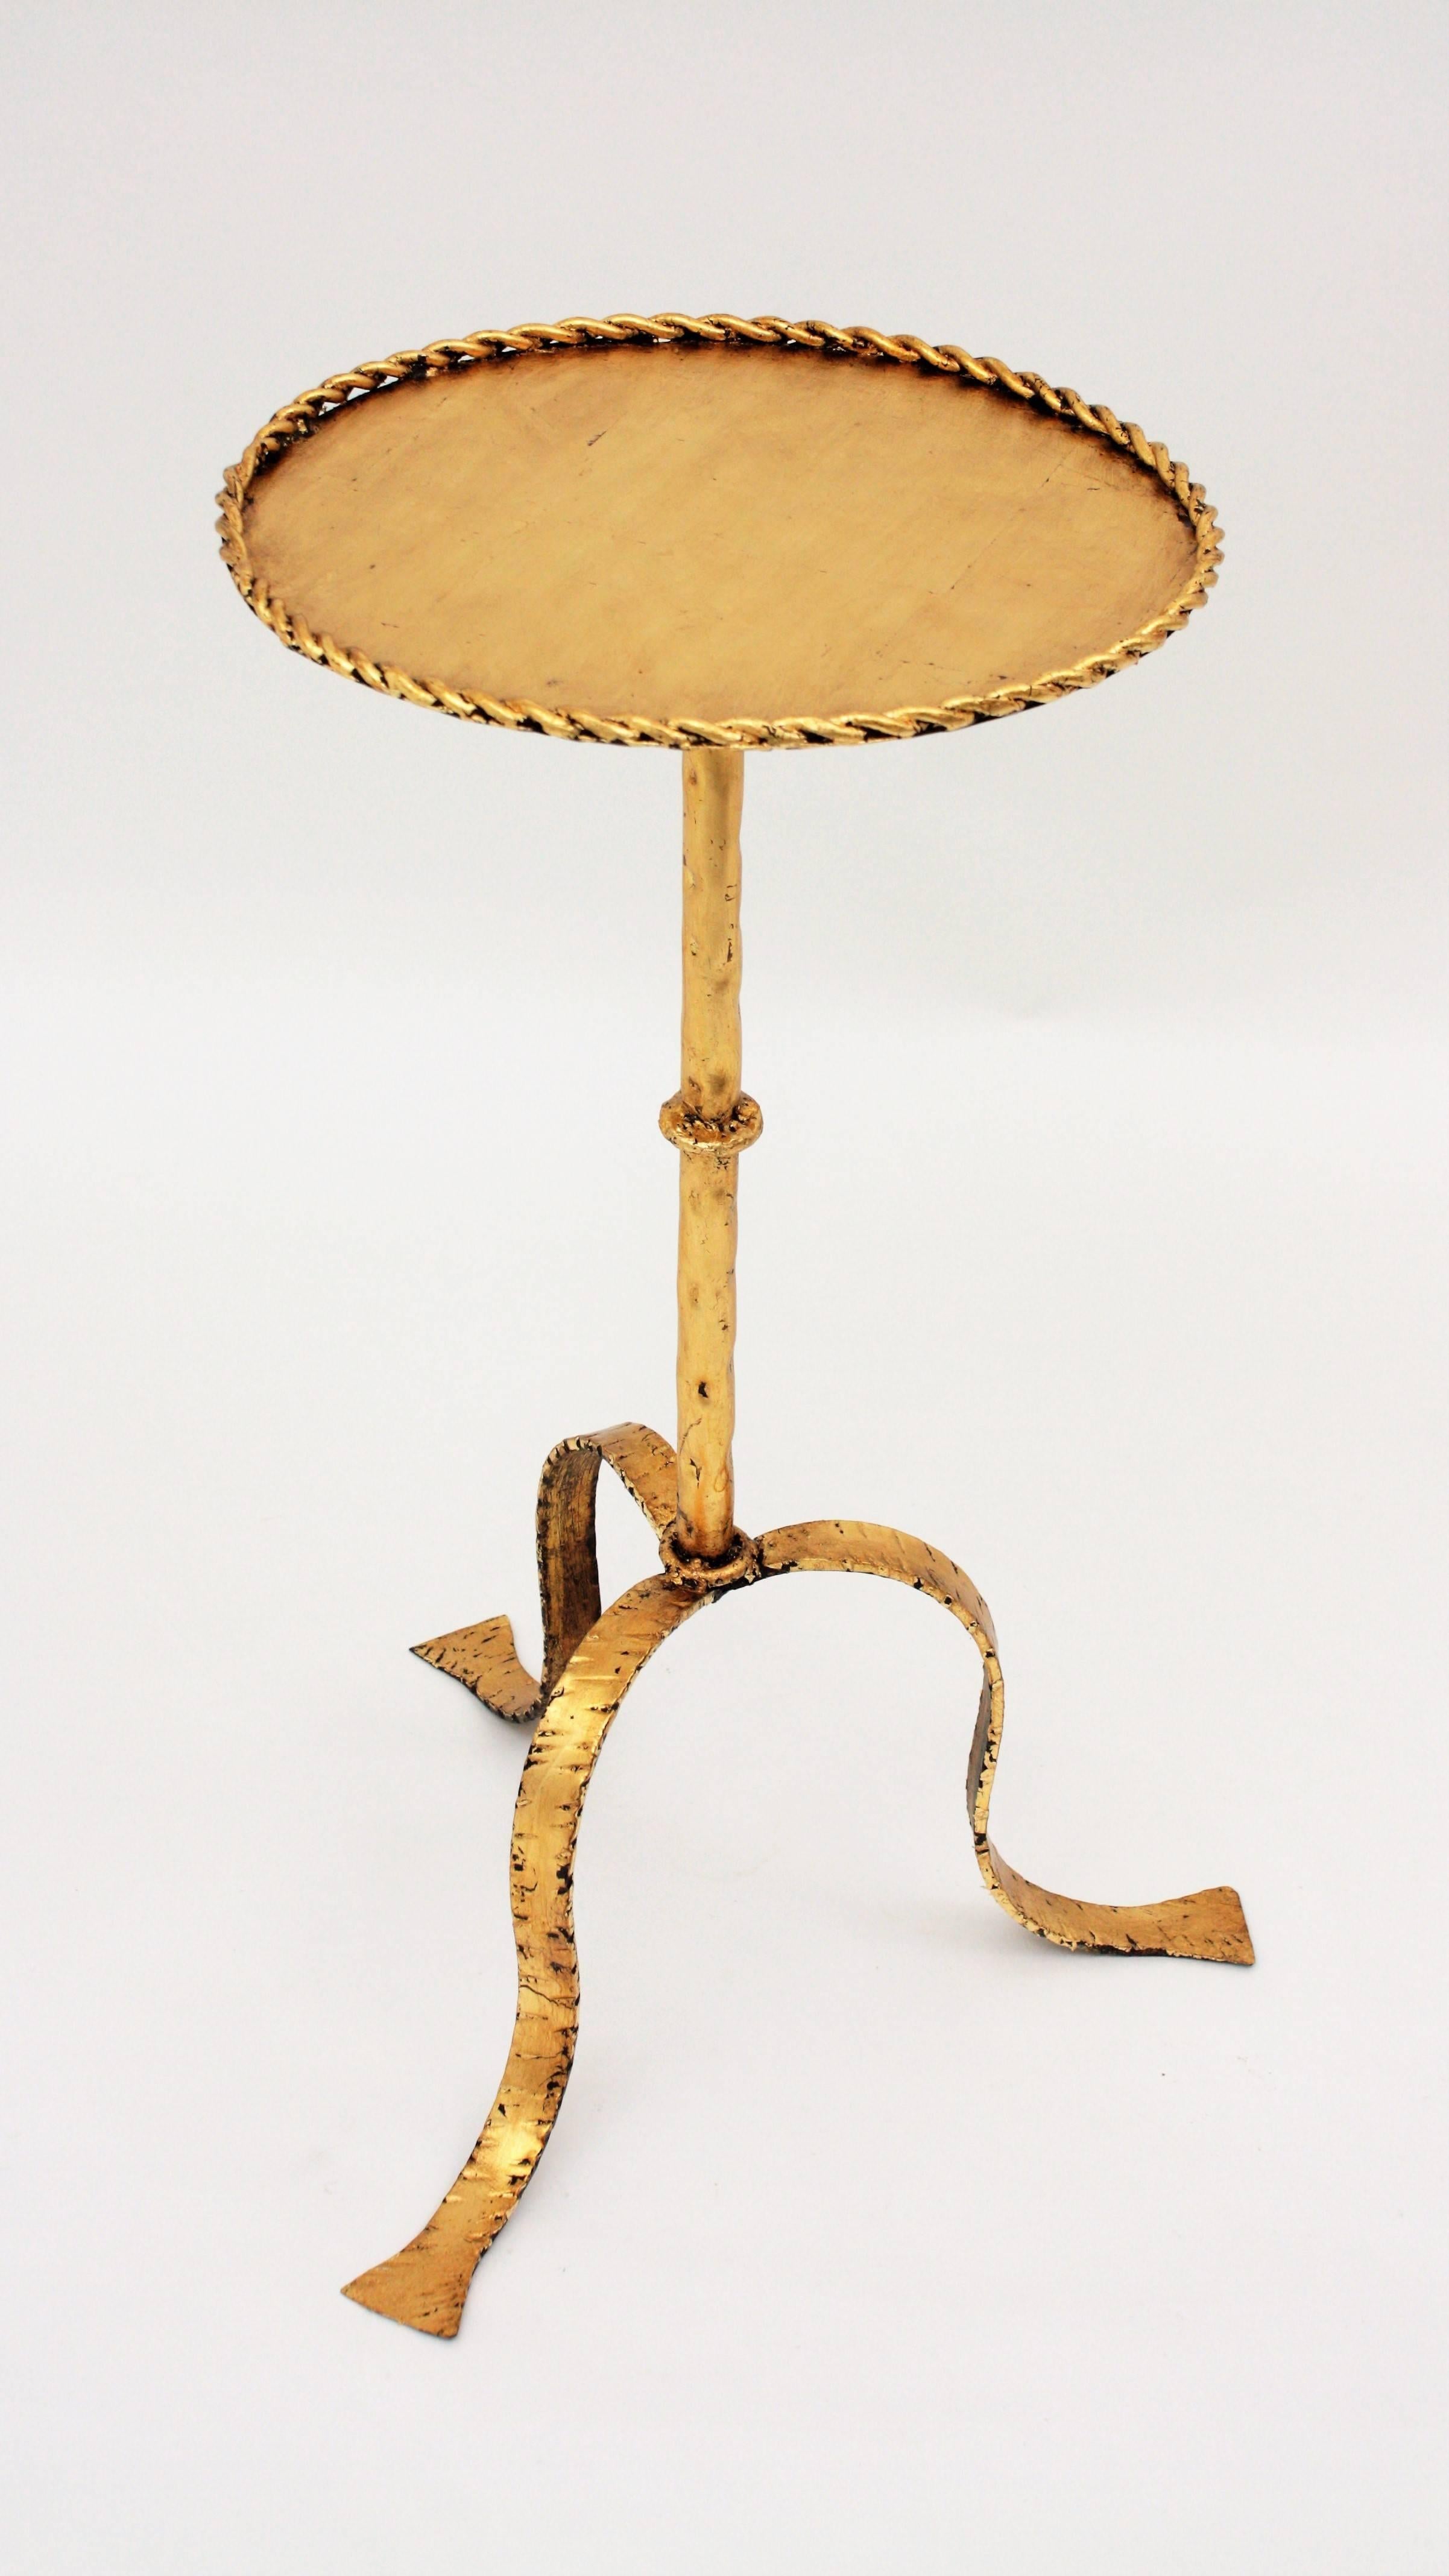 An stylish Gothic style hand-hammered gilt iron gueridon table in gold leaf finish. Useful as side table, smokers table or stand. This piece is in excellent vintage condition. Spain, 1930s-1940s. Diameter of the top: 30cm. 

 